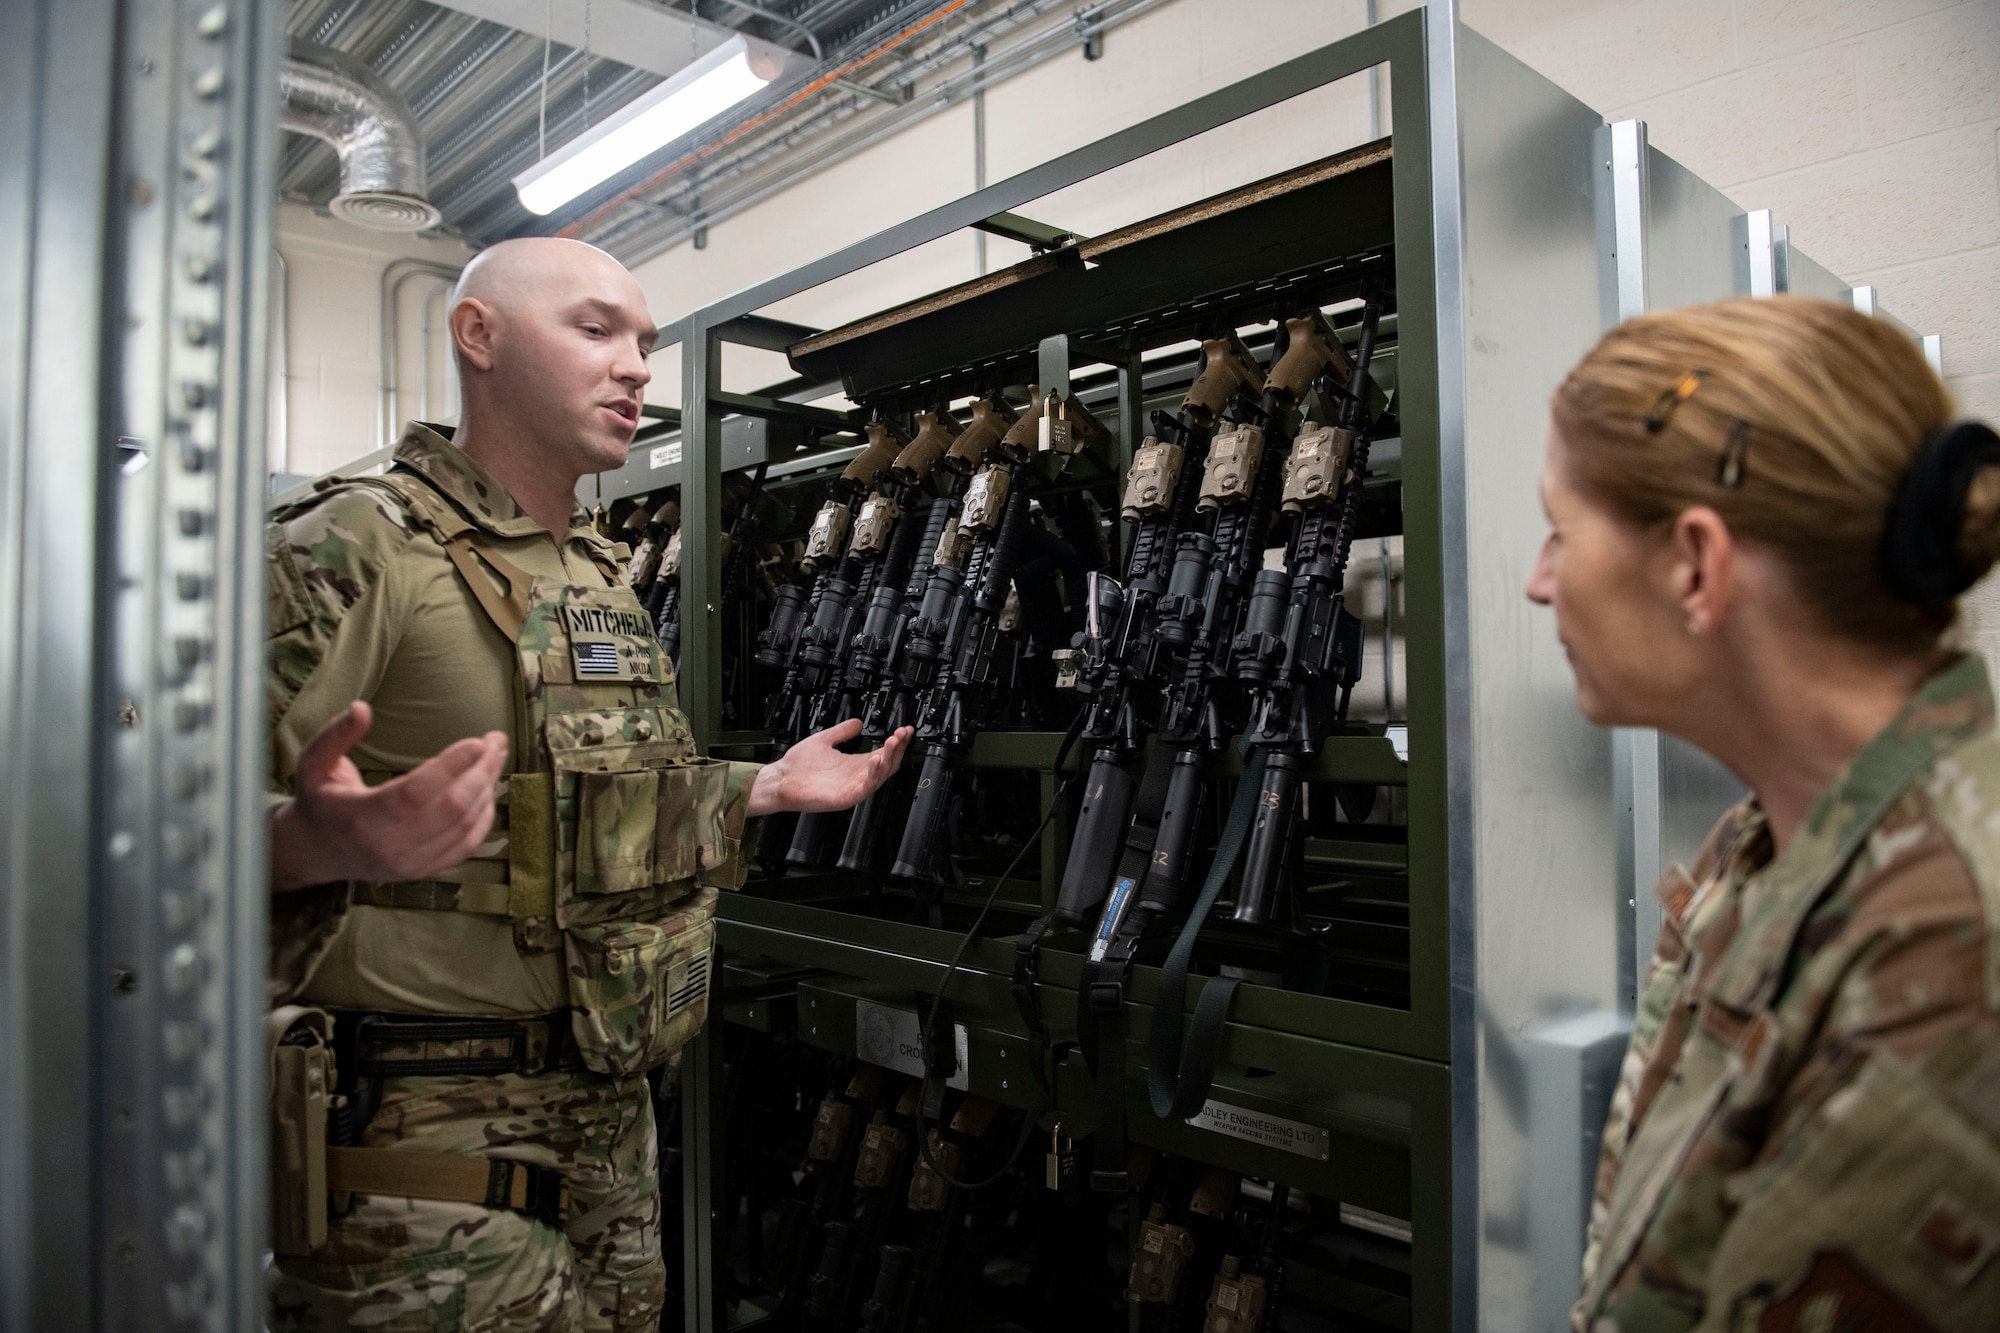 U.S. Air Force Staff Sgt. Kevin Mitchell, 422d Security Forces Squadron non-commissioned officer in charge of the armory, left, tells Col. Lisa Wildman, 501st Combat Support Wing vice commander, about the changes made to the armory at RAF Croughton, England, April 6, 2022. The armory was the first in the entire Air Force to fully integrate a radio-frequency identification tracking system. (U.S. Air Force photo by Senior Airman Jason W. Cochran)